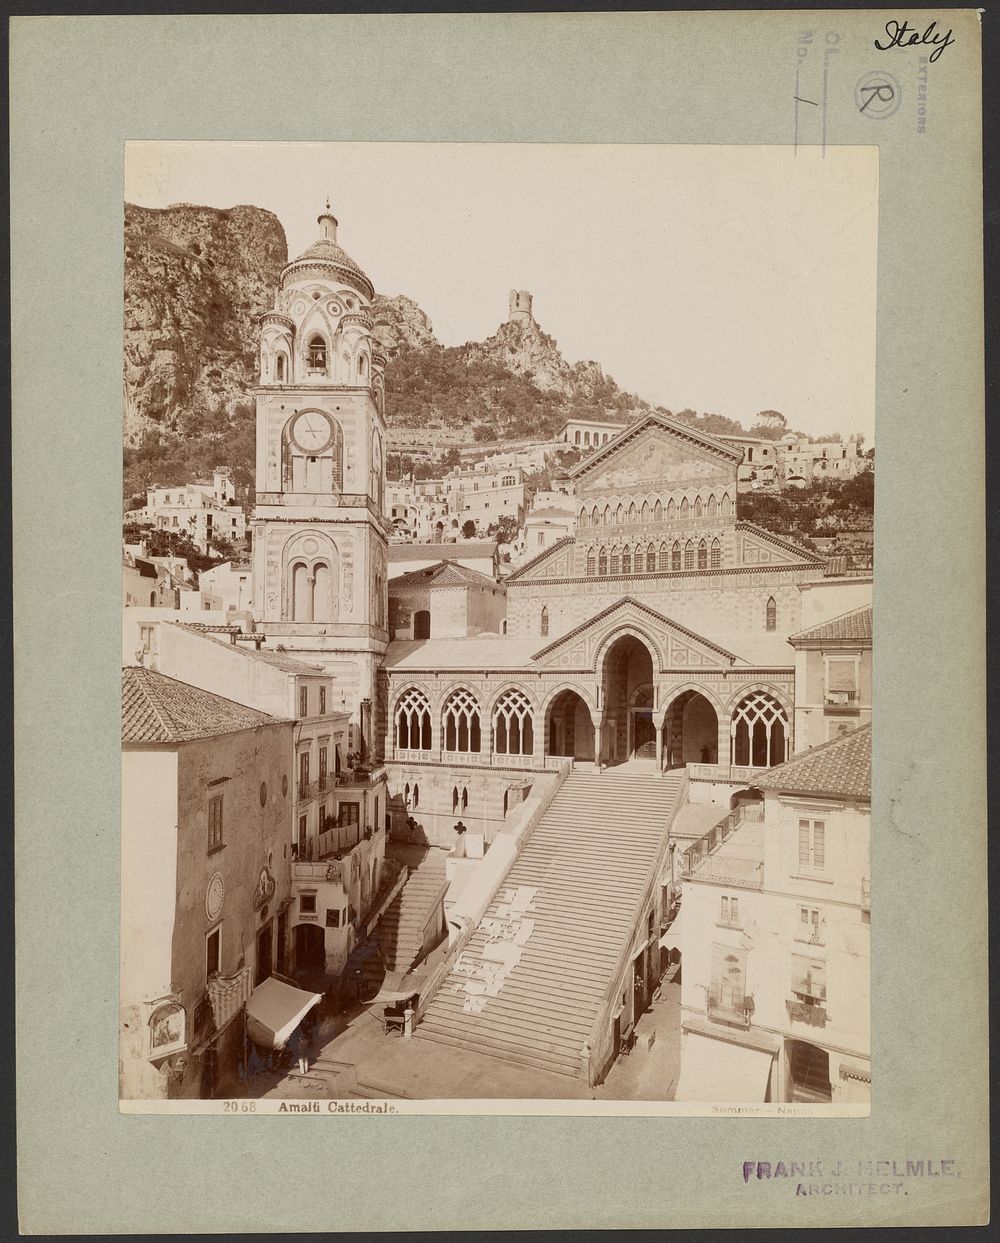 Amalfi Cattedrale by Giorgio Sommer